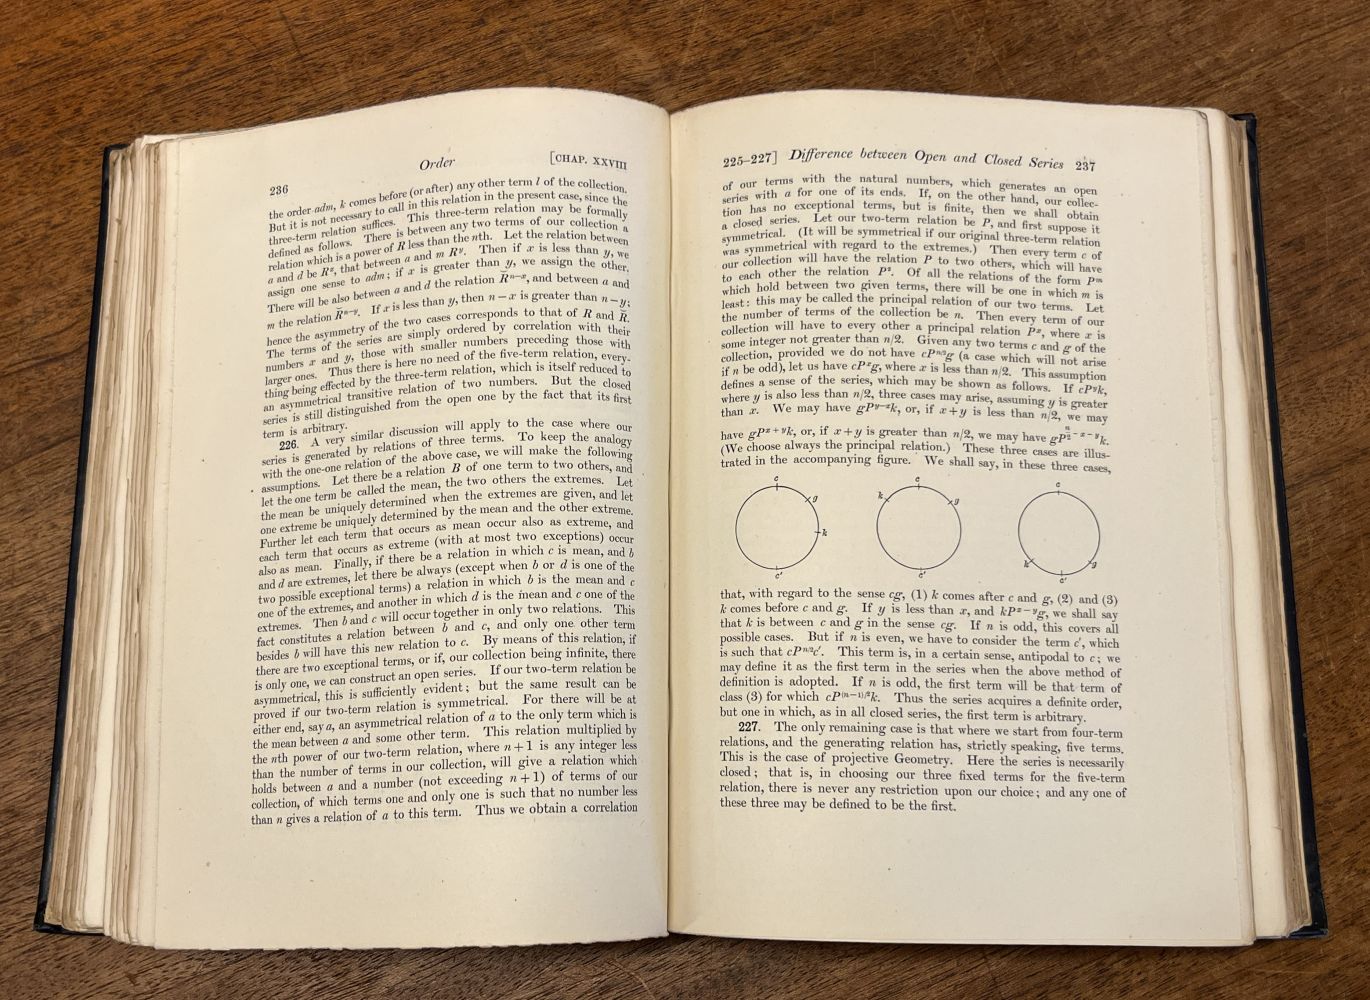 Russell (Bertrand). The Principles of Mathematics, volume 1 [all published], 1st edition, 1903 - Image 7 of 9